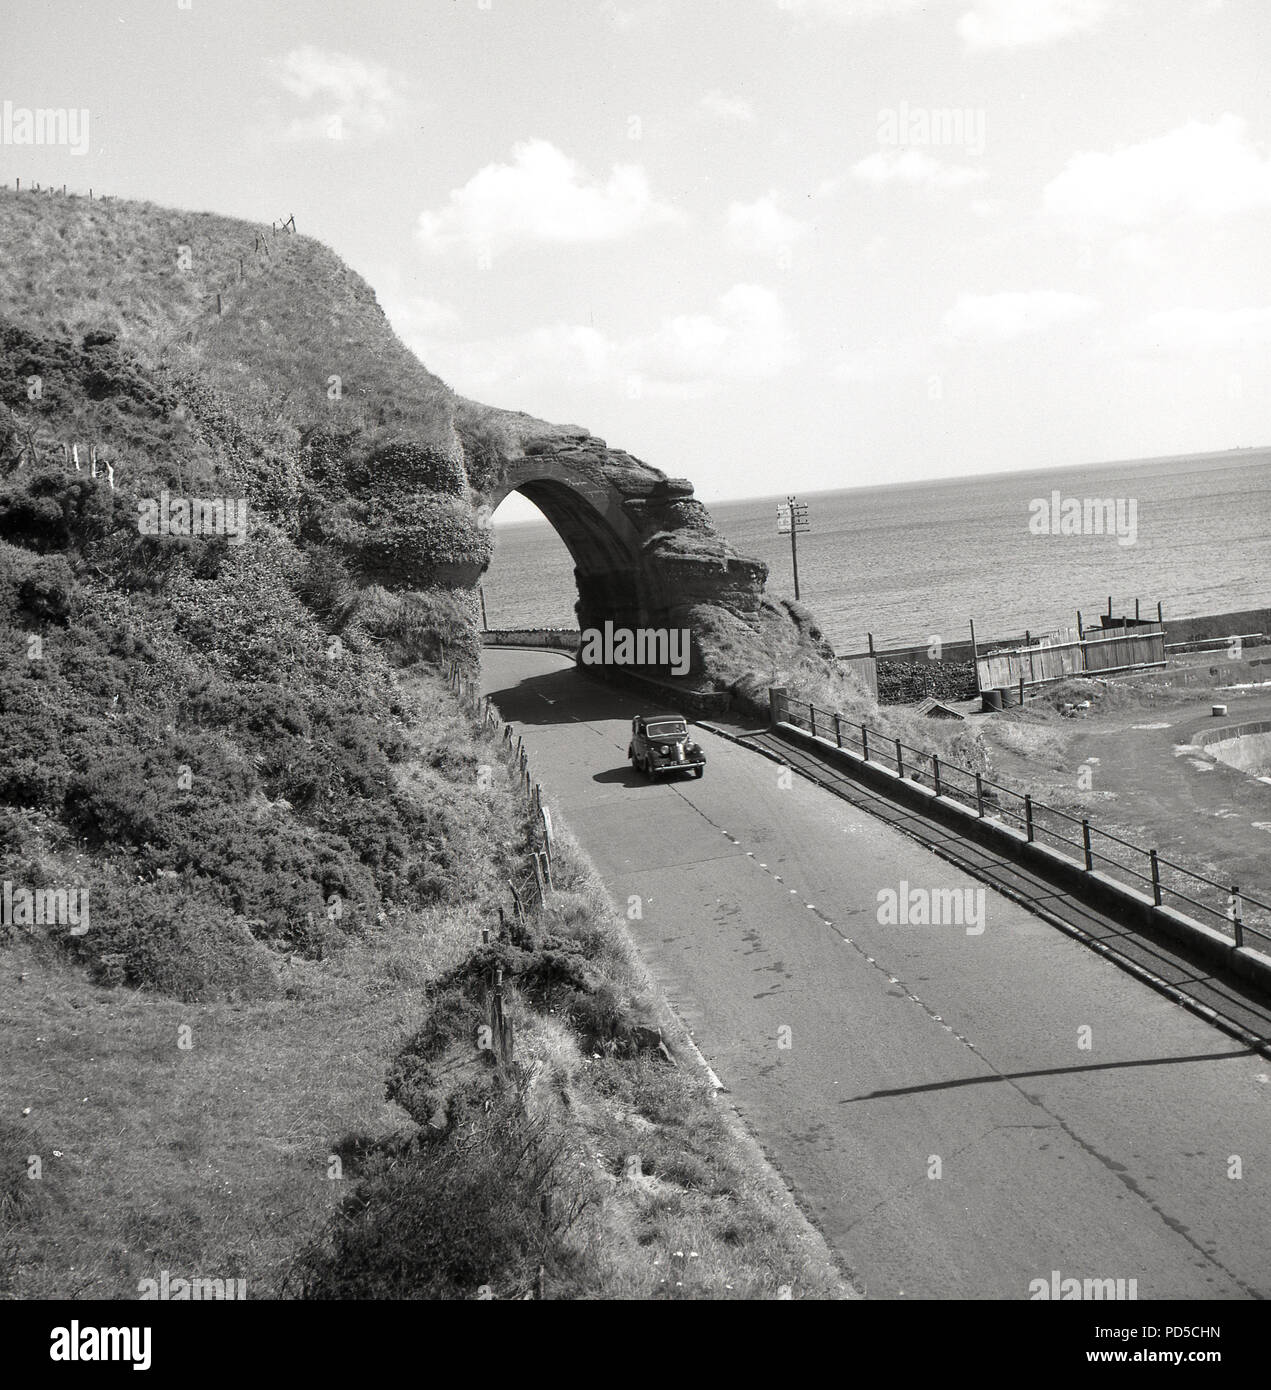 1950s Historical Picture By J Allan Cash A Car Of The Era Traveling On A Quiet Empty Road On The Spectacular Antrim Causeway Coastal Route Northern Ireland Uk Stock Photo Alamy